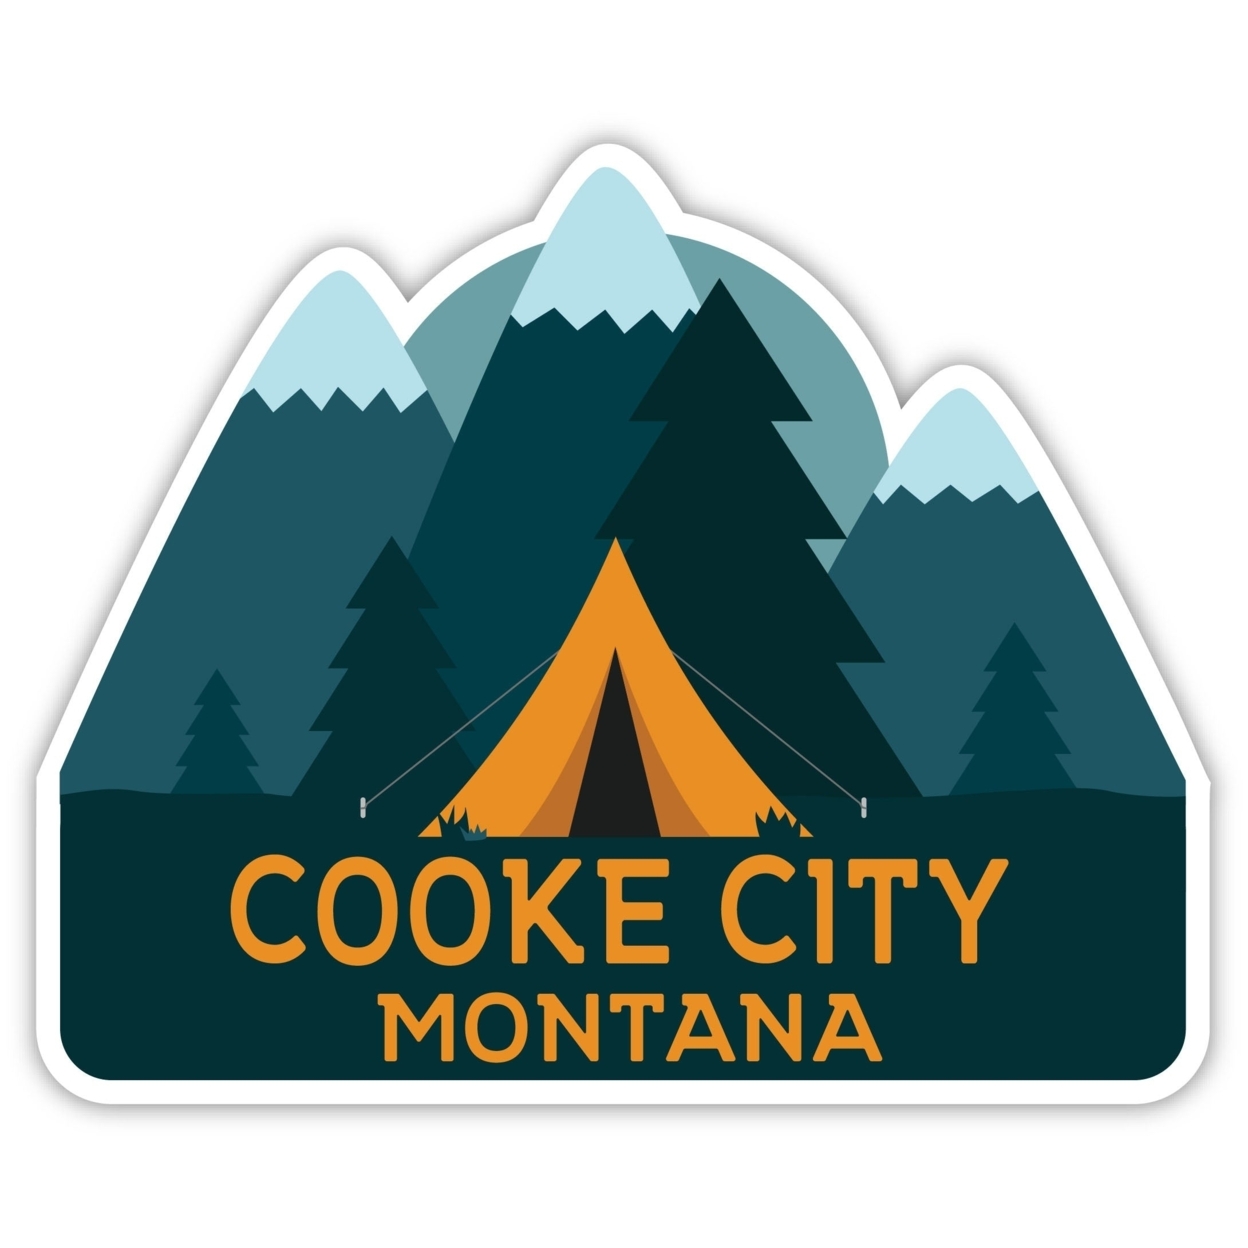 Cooke City Montana Souvenir Decorative Stickers (Choose Theme And Size) - 4-Pack, 10-Inch, Tent